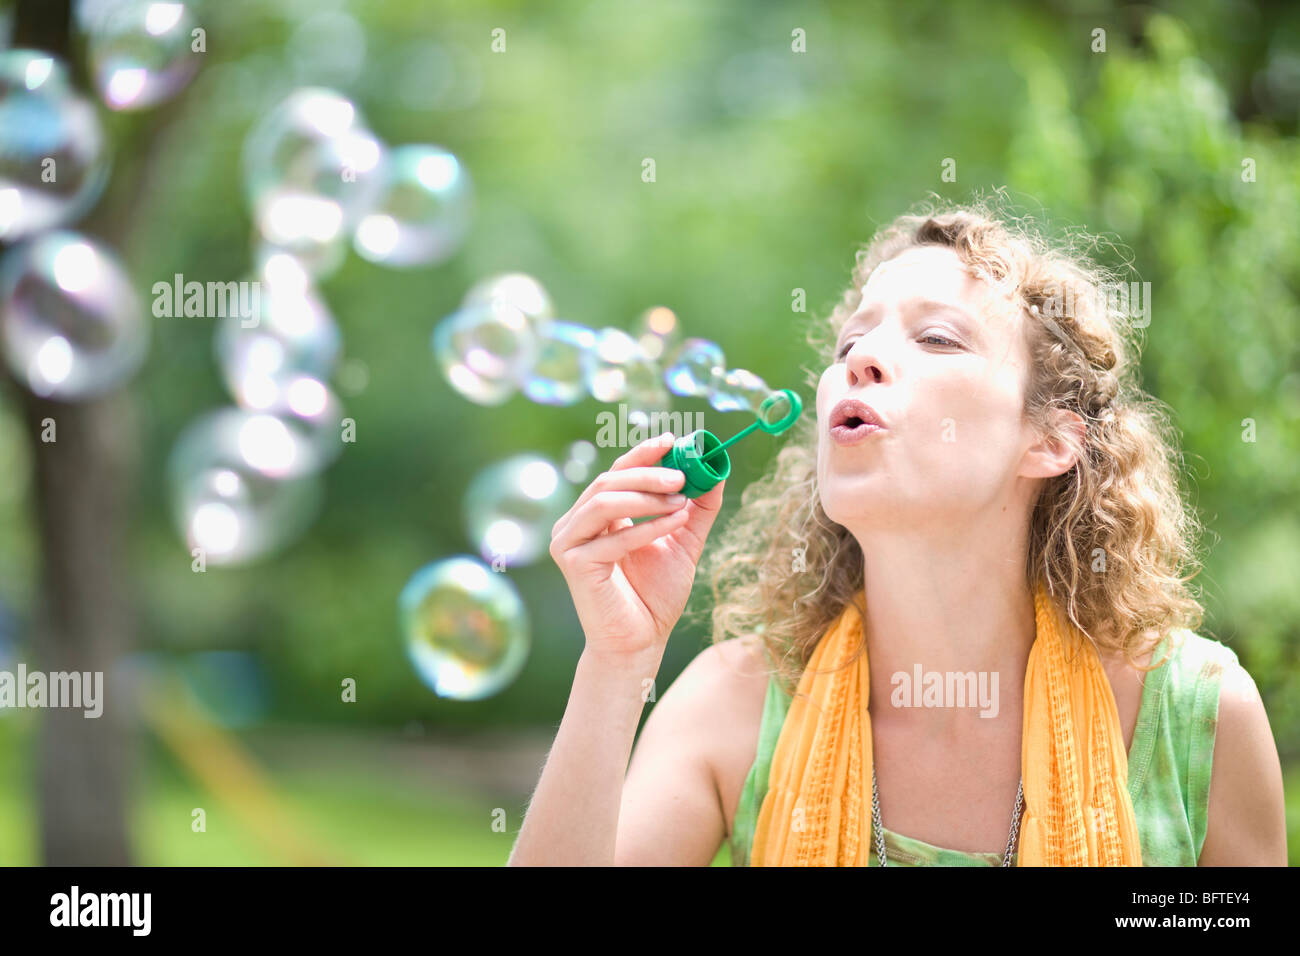 young woman blowing bubbles Stock Photo